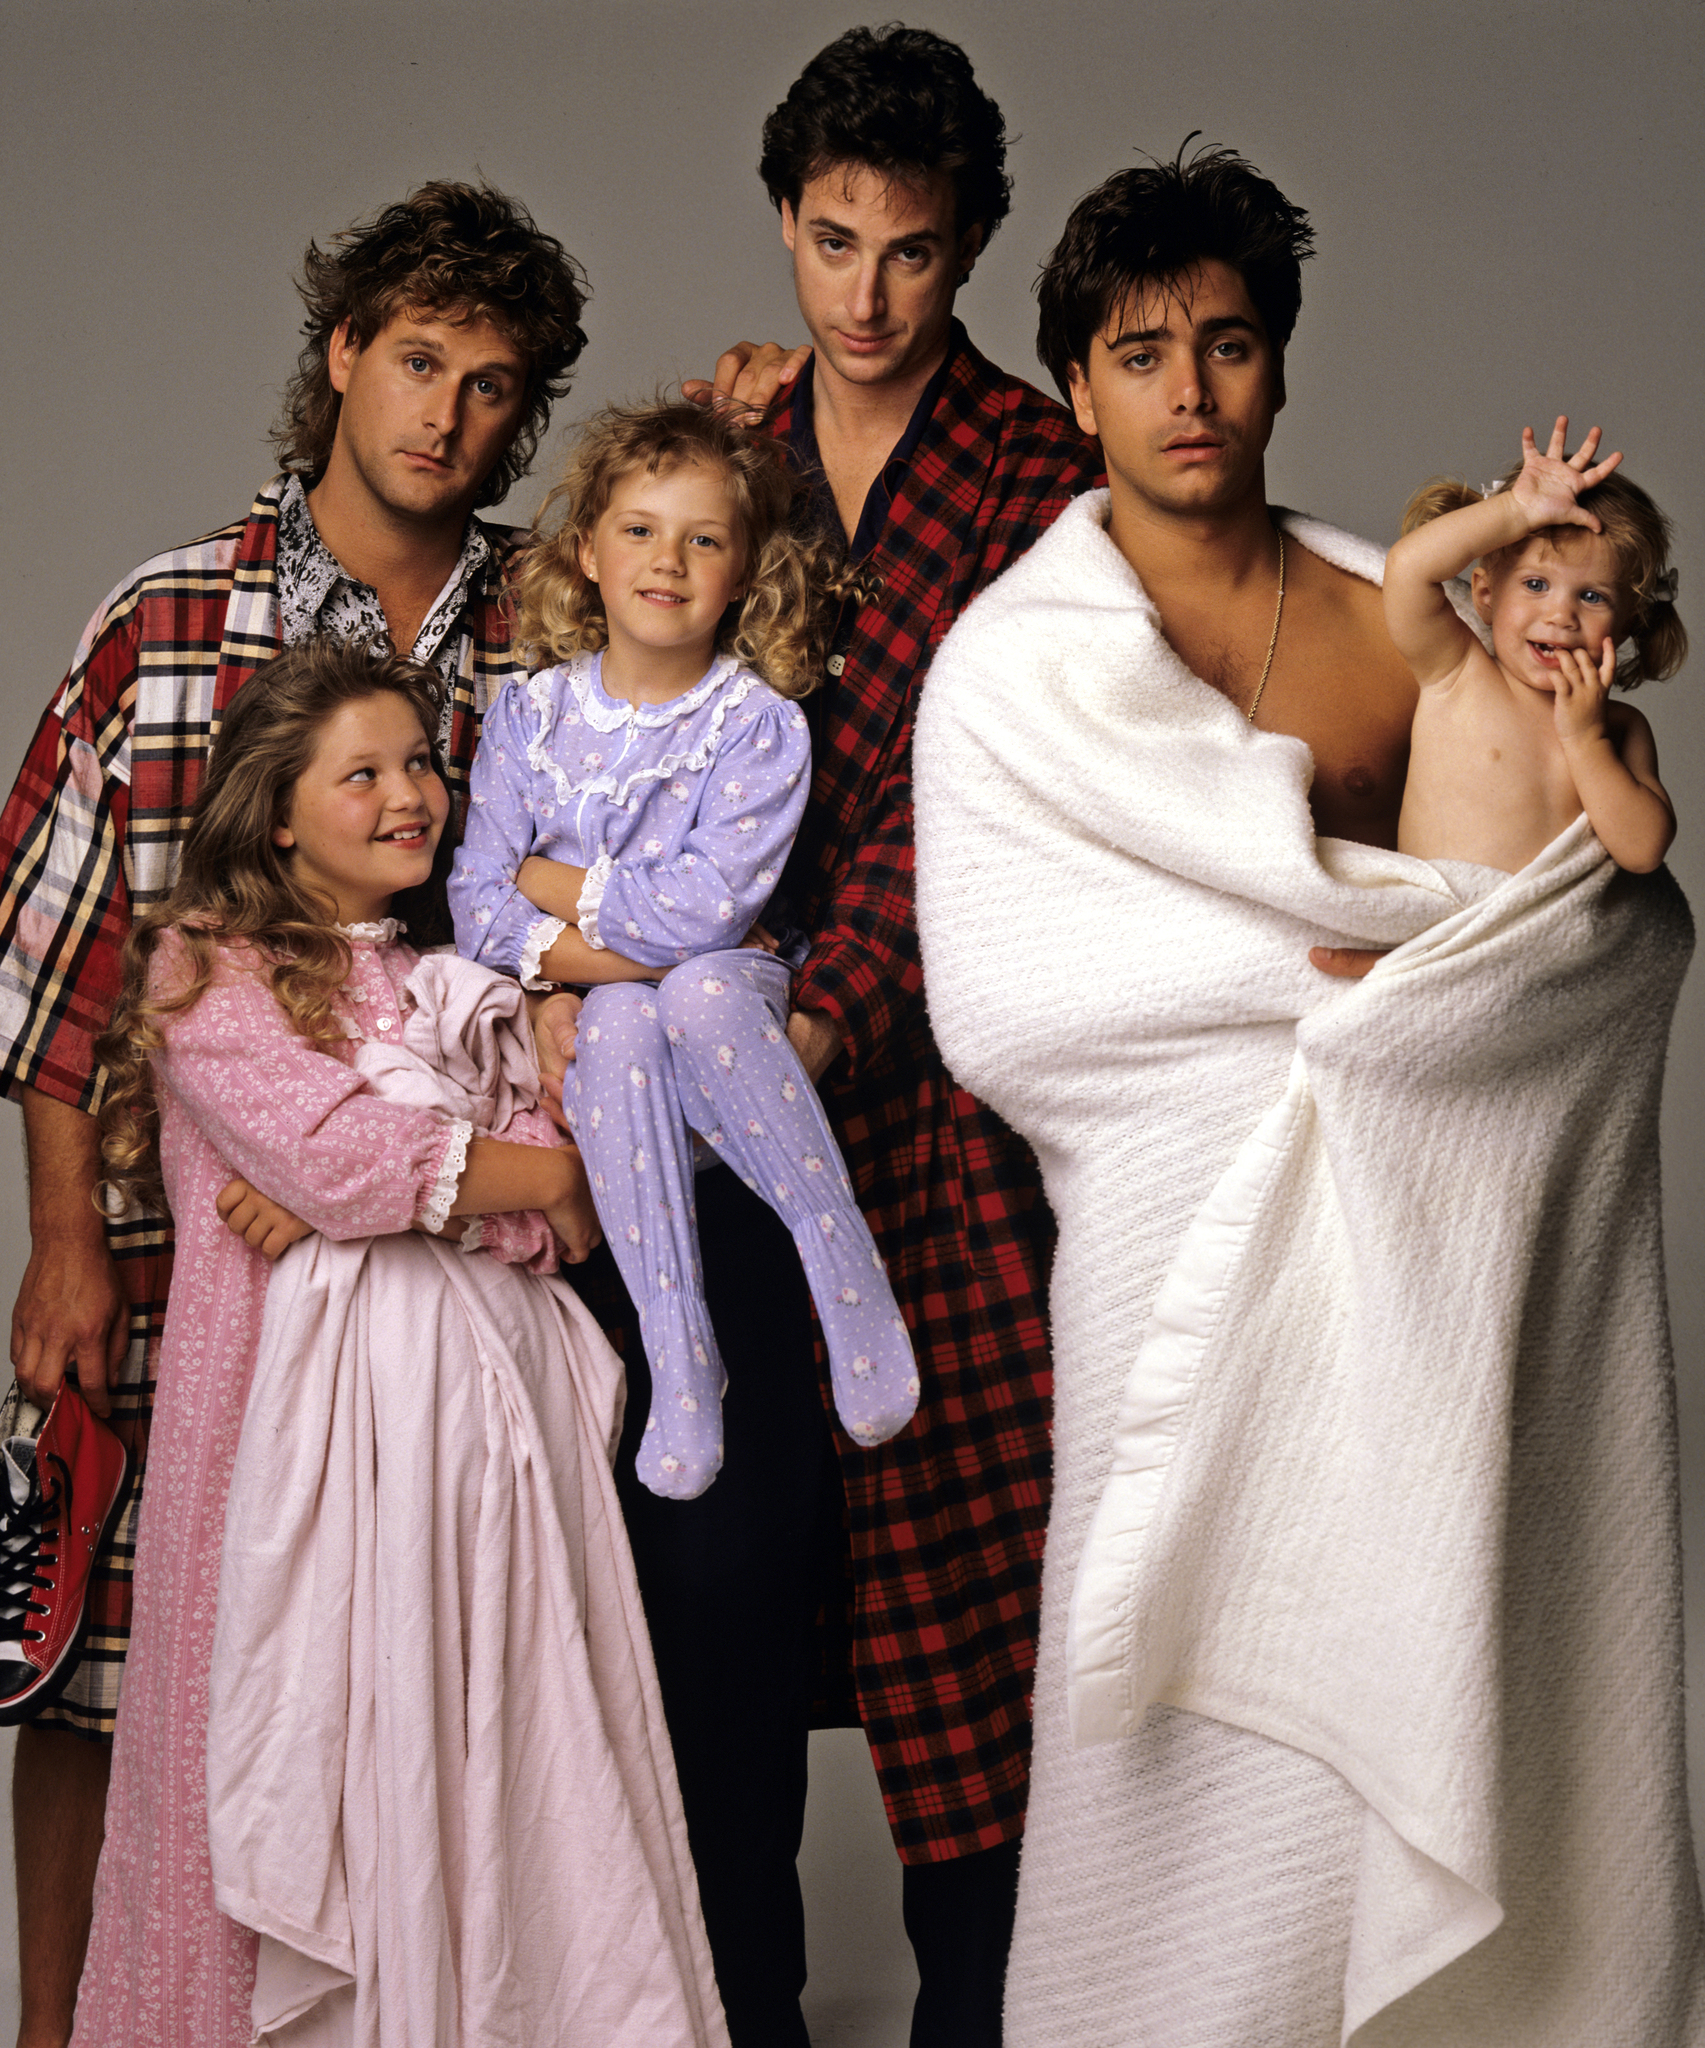 Still of Ashley Olsen, John Stamos, Dave Coulier, Bob Saget and Jodie Sweetin in Full House (1987)